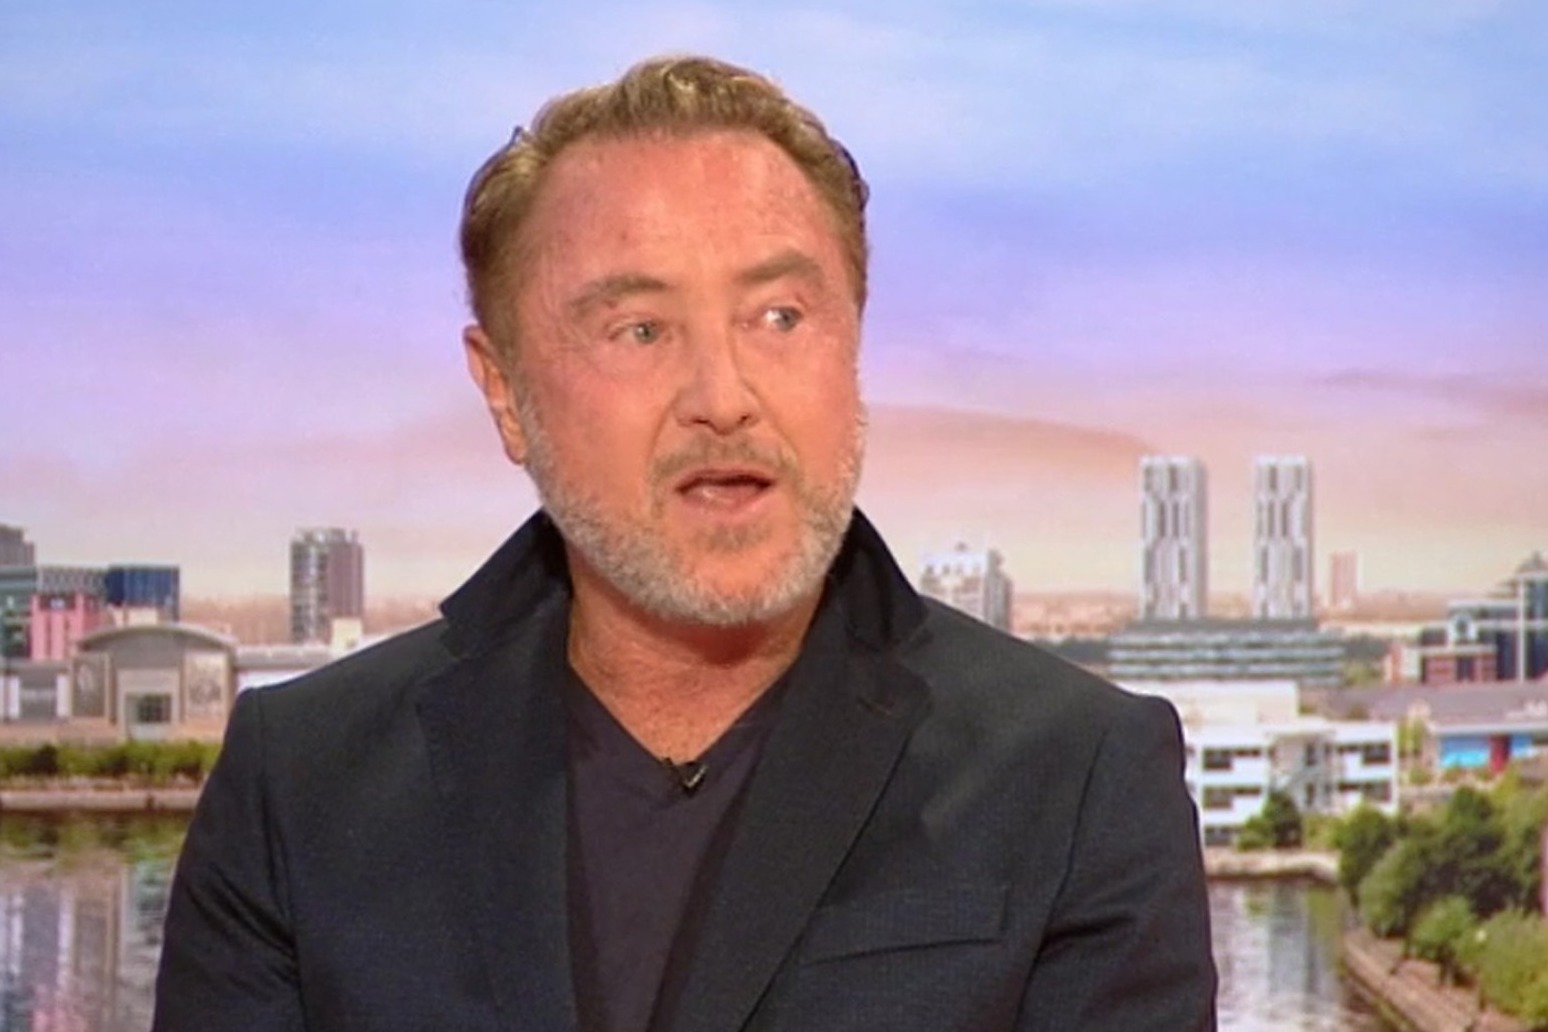 Michael Flatley was told going into the film world was ‘impossible’ 